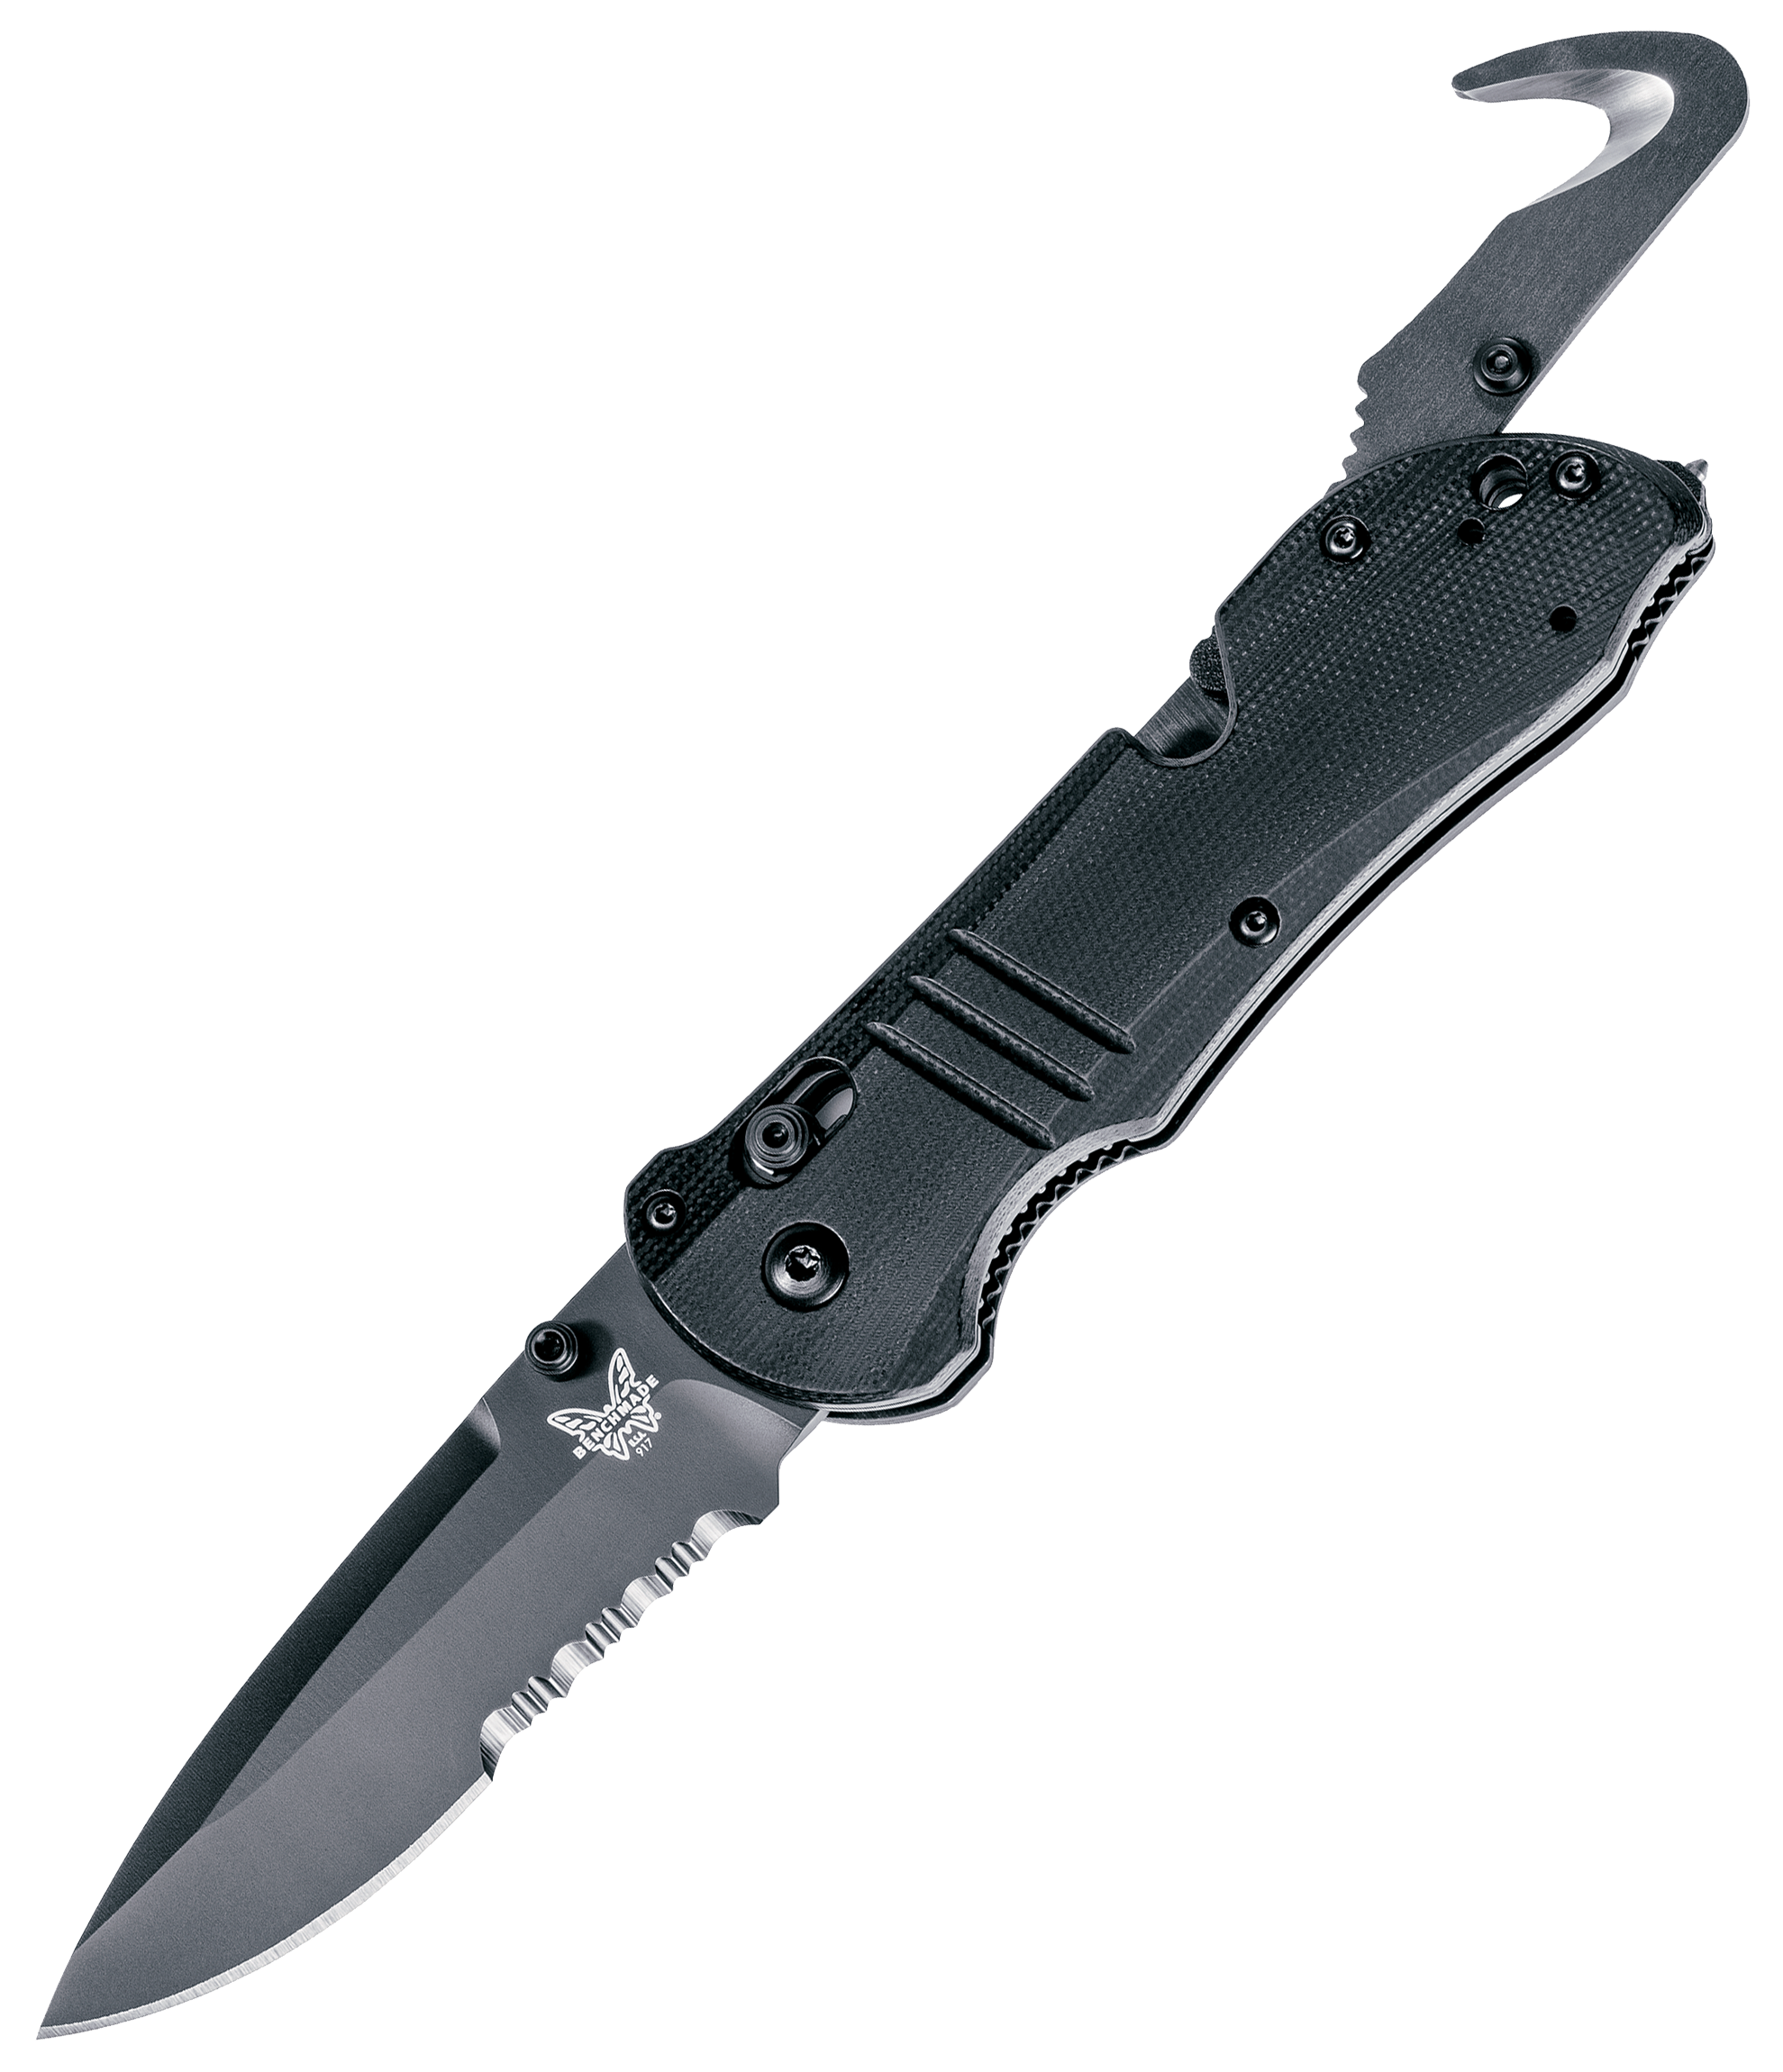 Benchmade 917 Tactical Triage Folding Knife